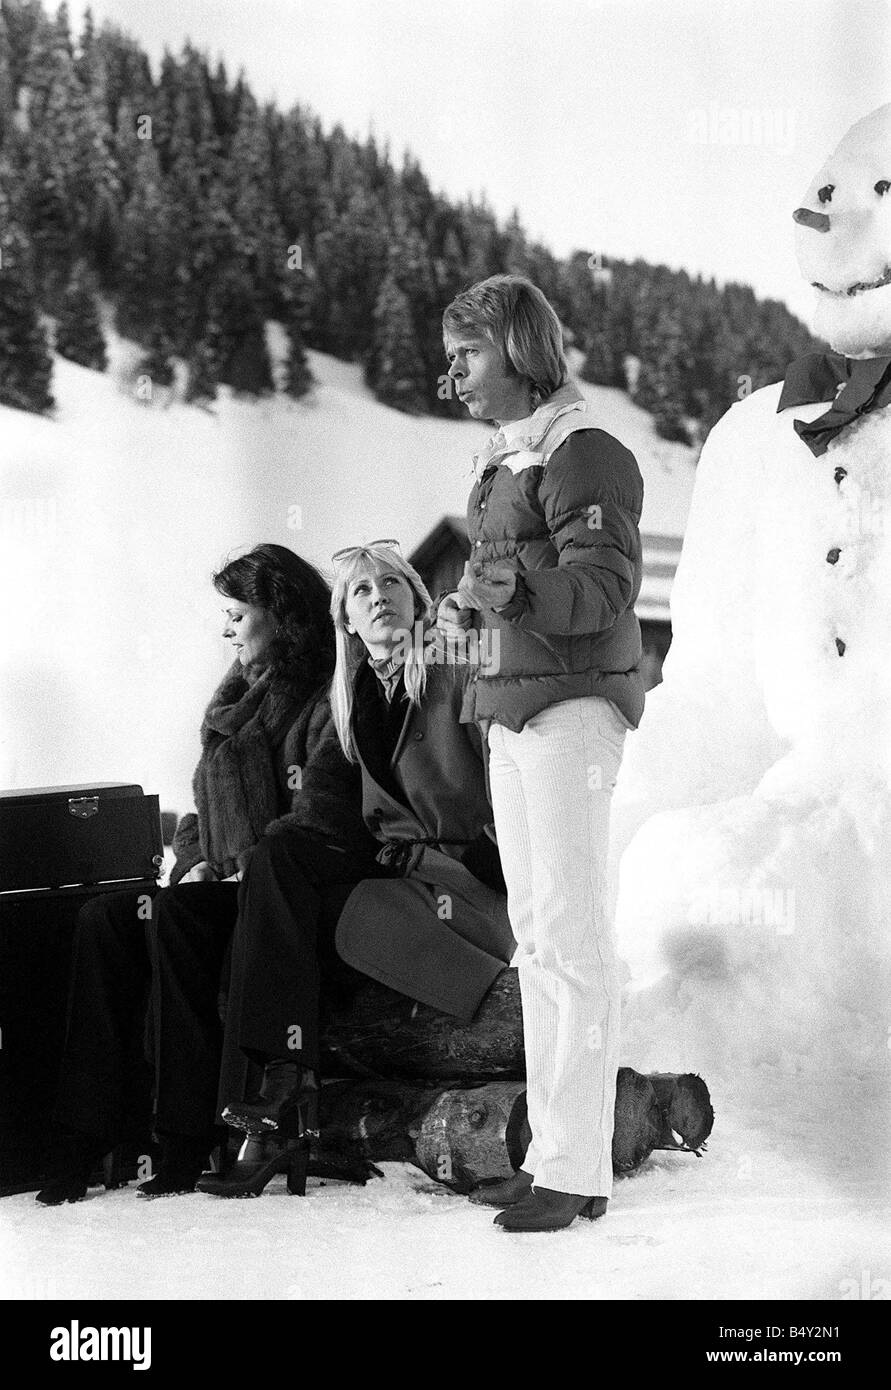 ABBA February 1979 Abba the 1970s Swedish pop group consisting of Benny Frida Bjorn and Anna who won in the 1974 Eurovision song contest with the song Waterloo OPS In Switzerland recording a video 24 2 1979 Stock Photo